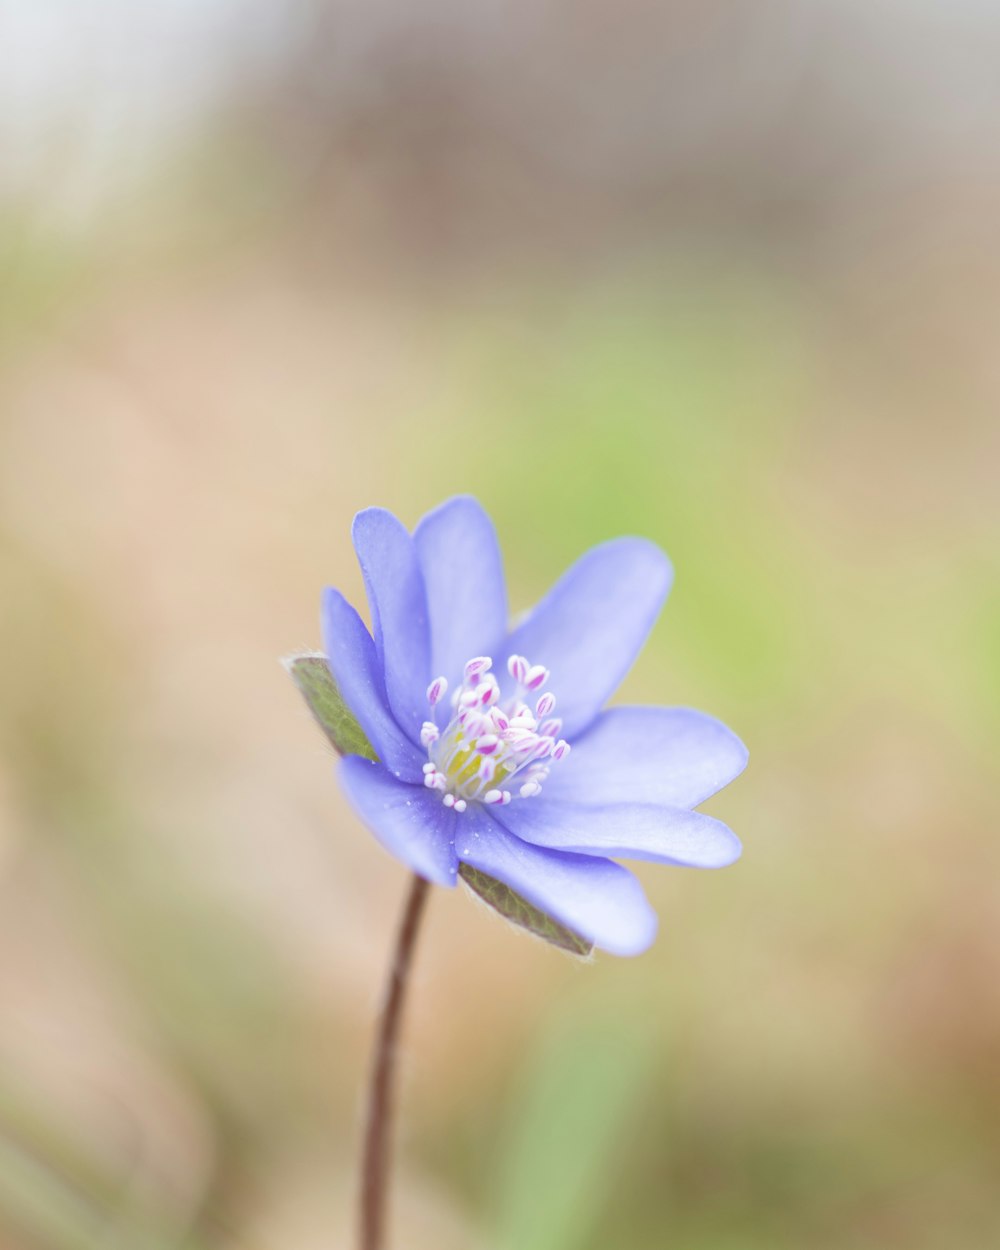 a small blue flower with a green stem